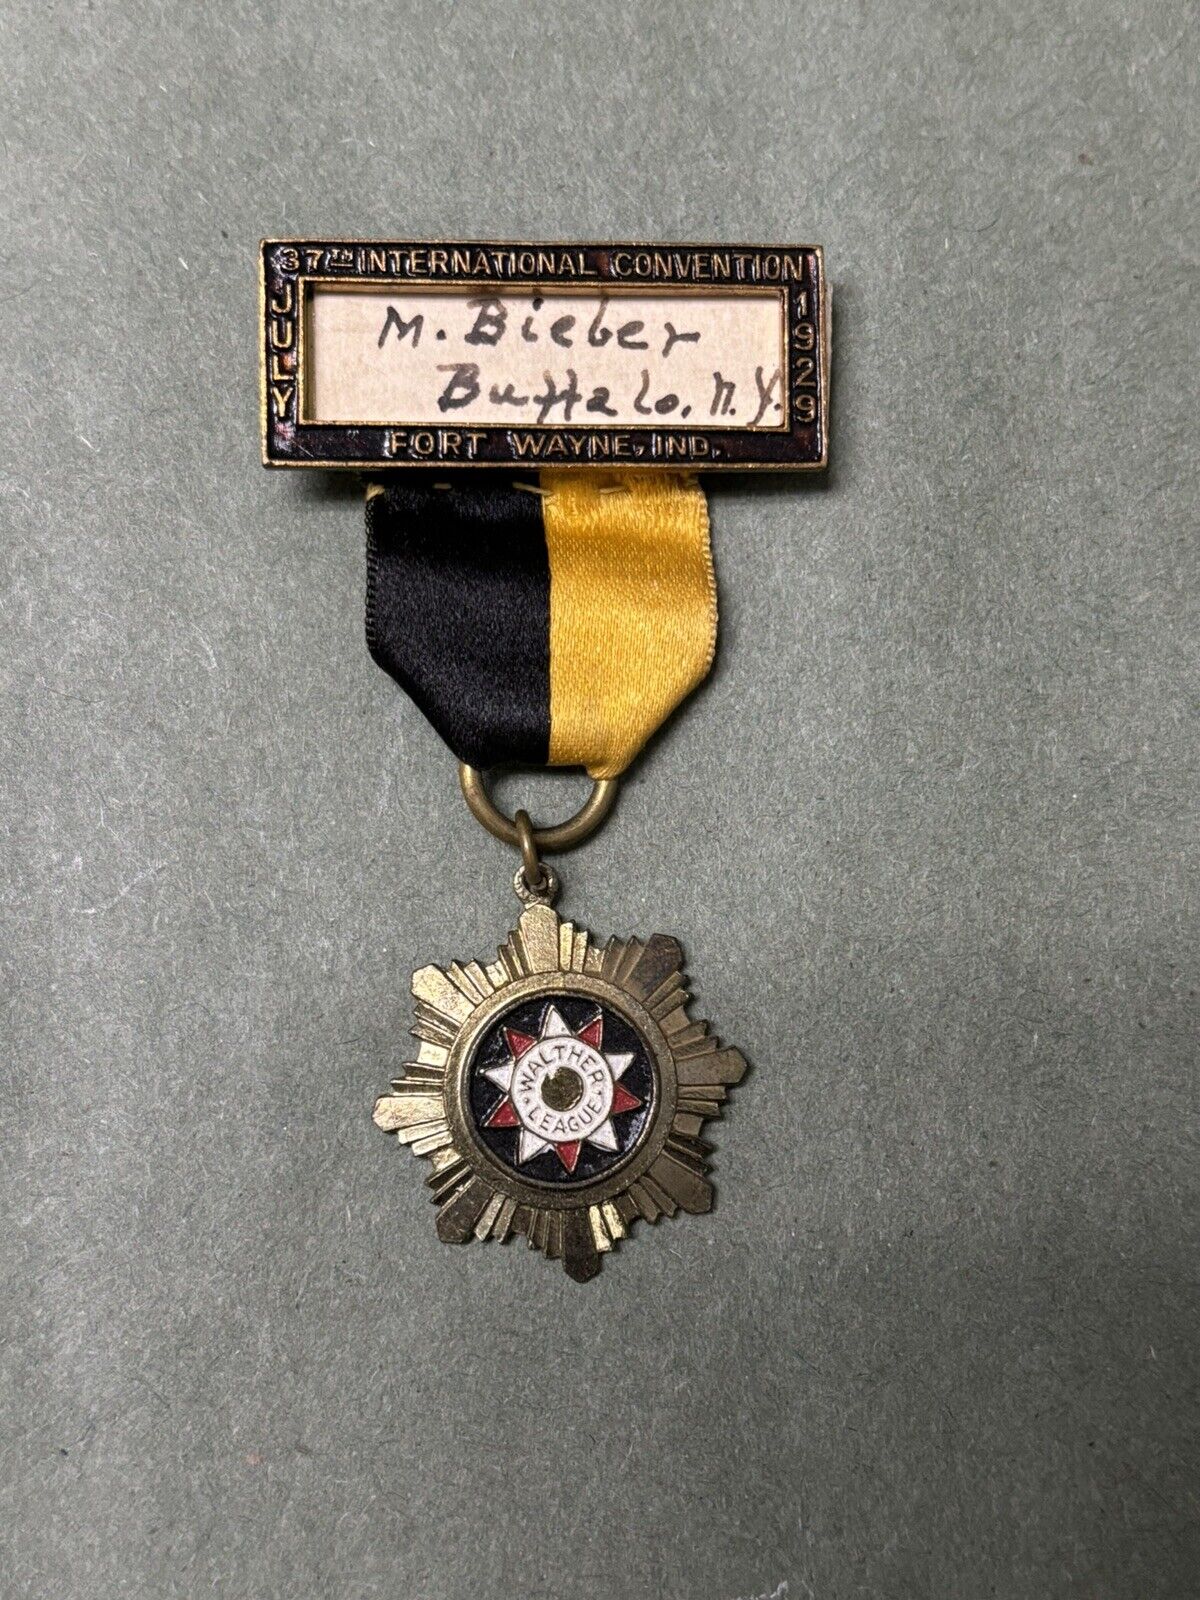 RARE 1929 Walther League Convention Medal, Fort Wayne Ind.